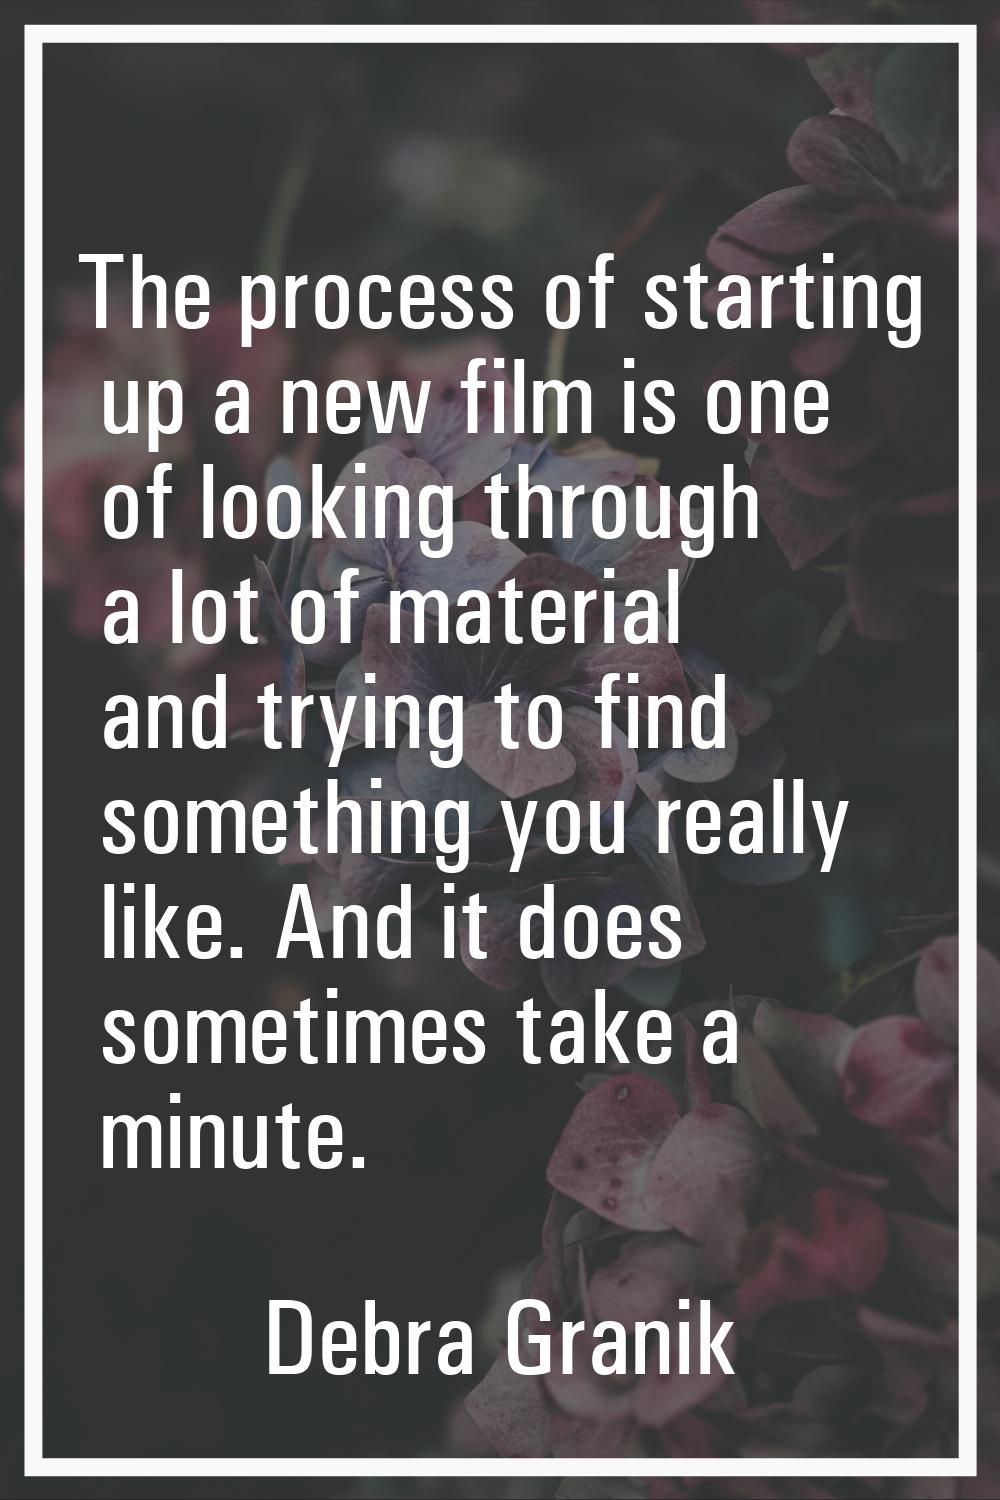 The process of starting up a new film is one of looking through a lot of material and trying to fin